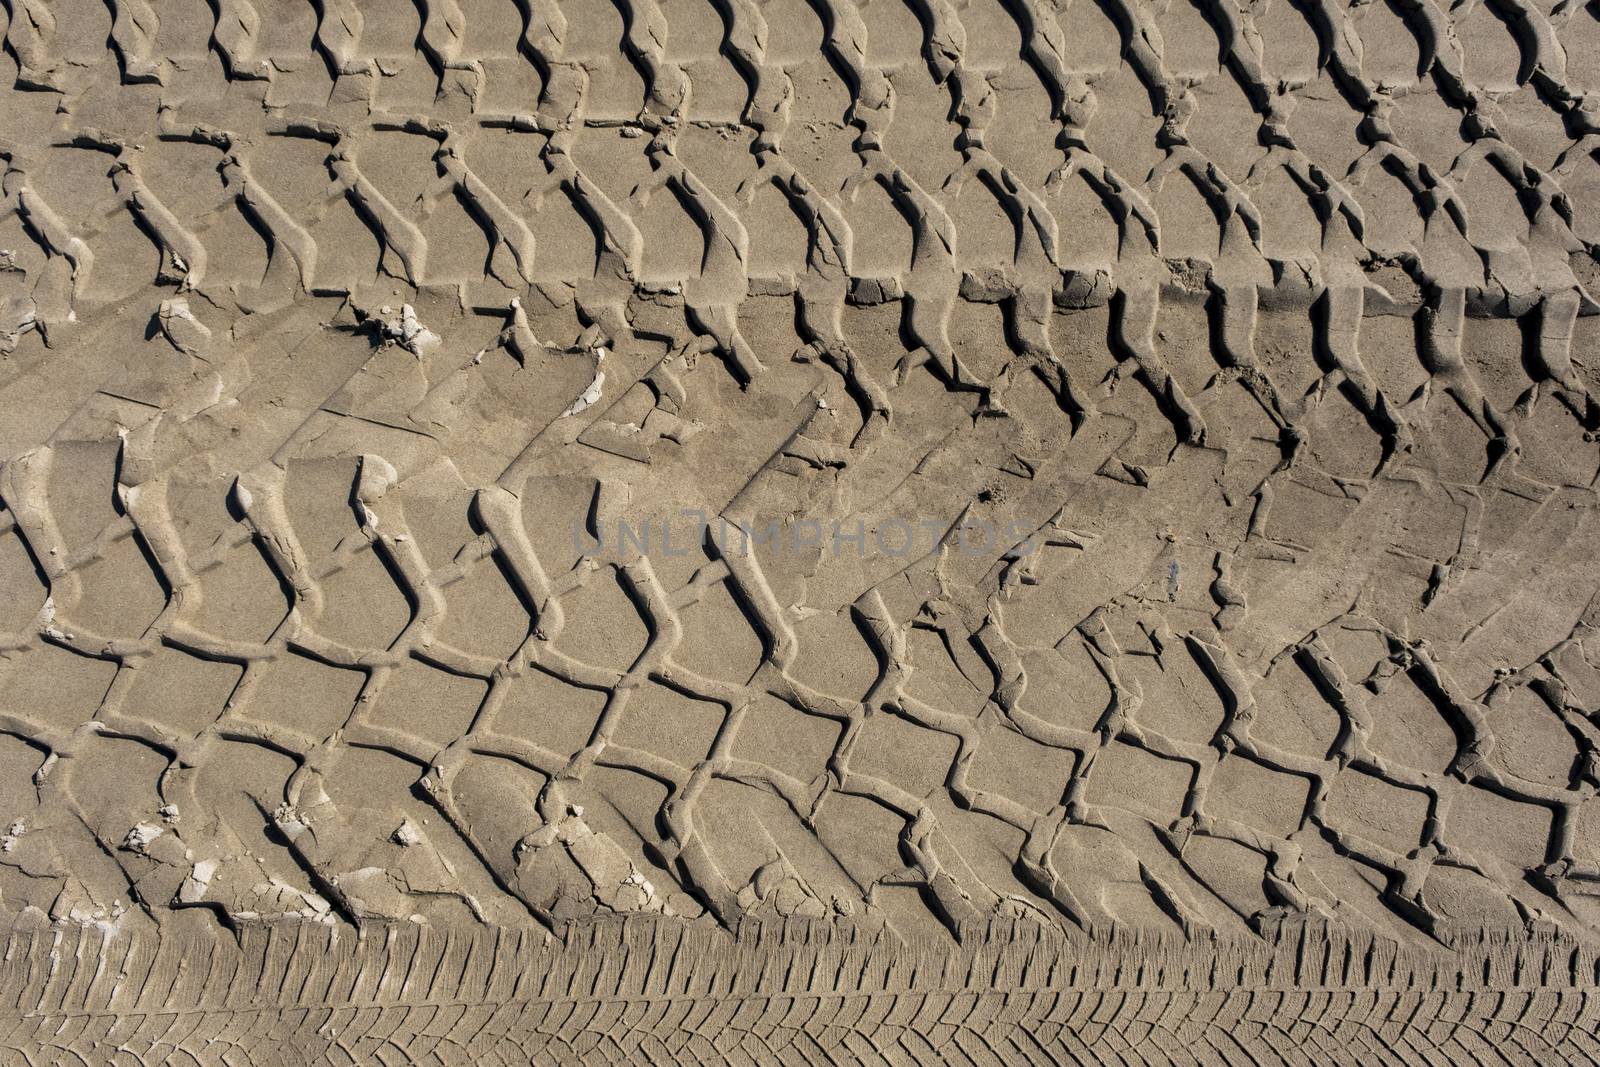 The trace of a set of tyres in the sand